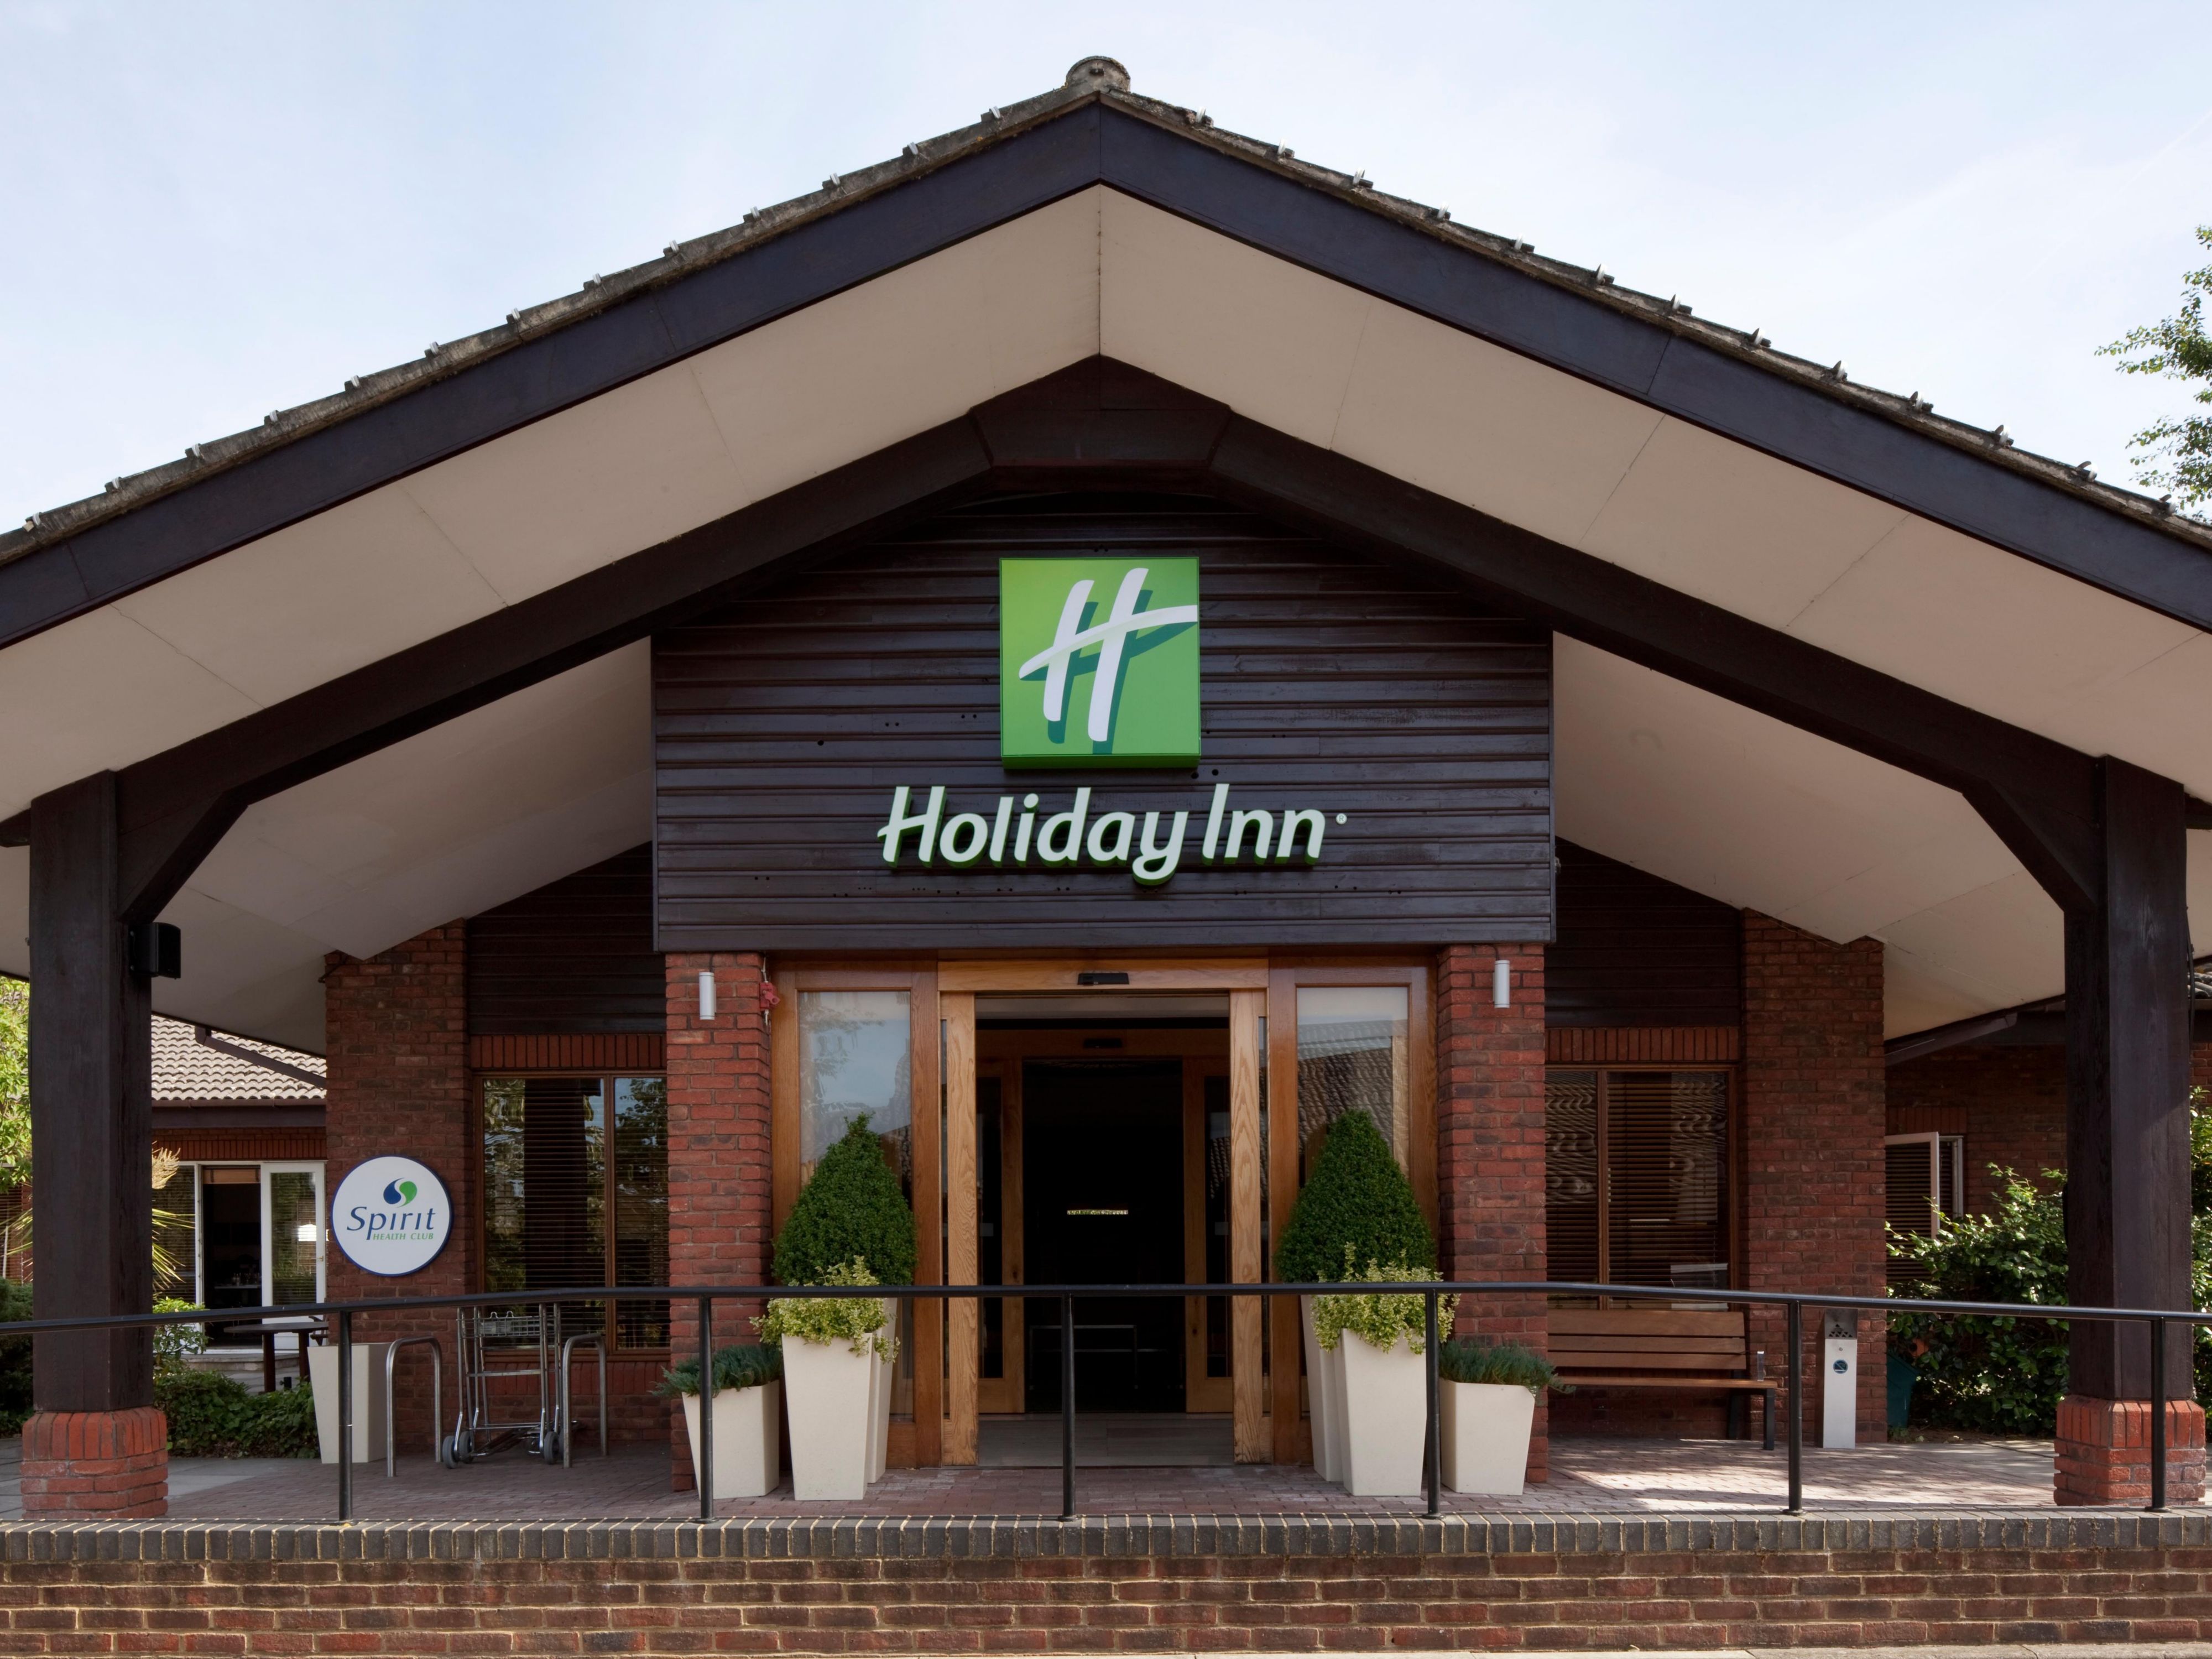 Just click on the link for a chance to visit Holiday Inn Guildford virtually with a fully interactive, virtual tour. Move through the hotel exploring the bar, restaurant, meeting and event spaces, bedrooms and Spirit Health Club.